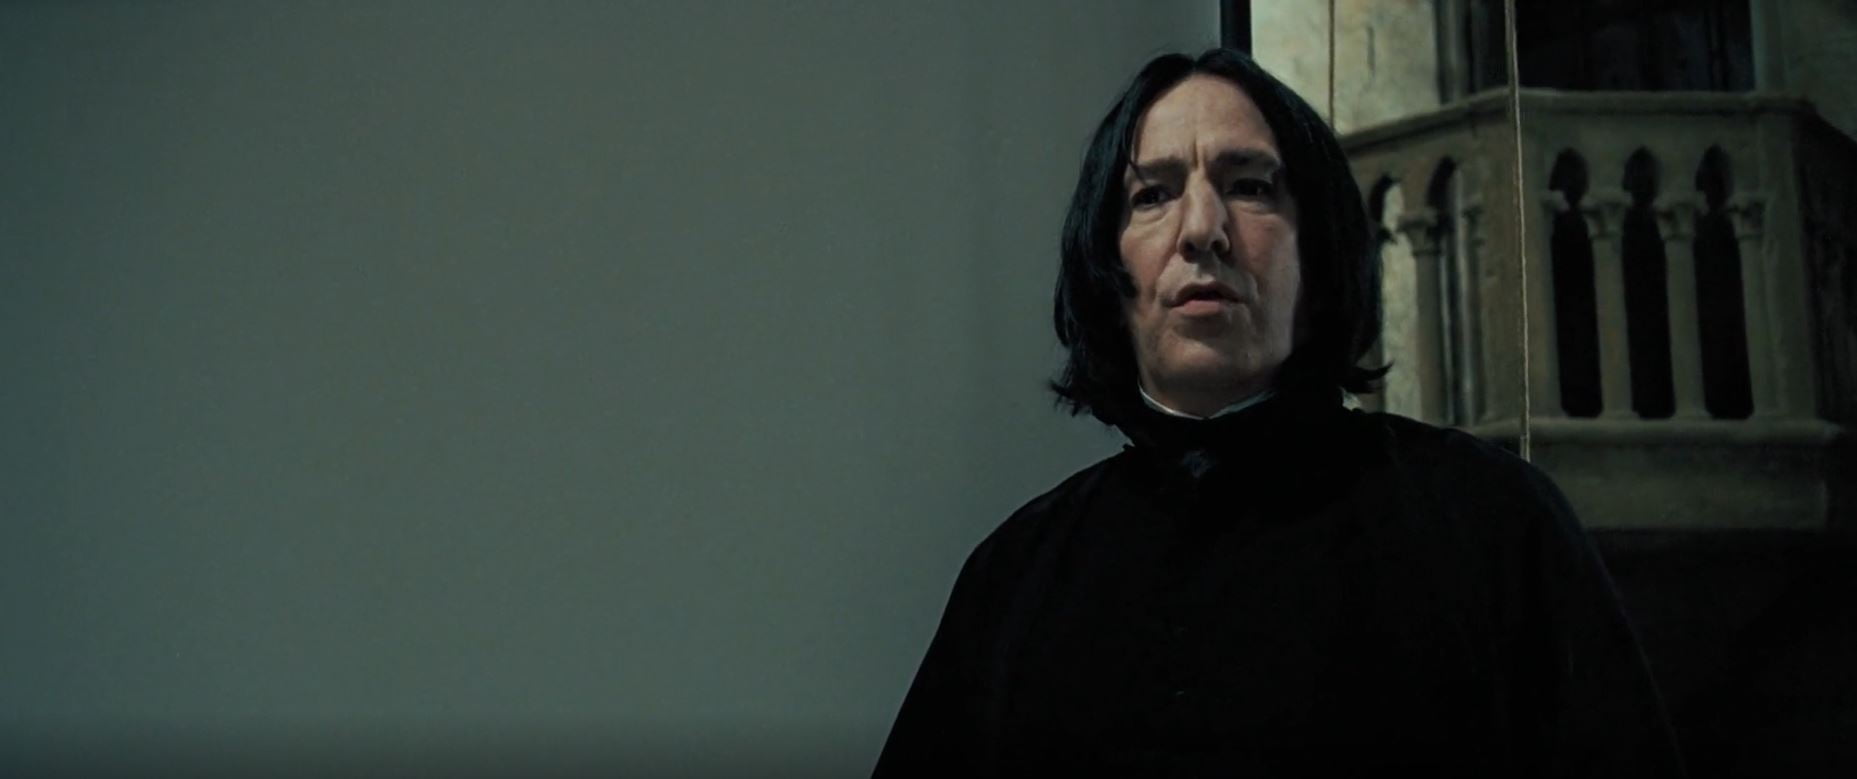 sinking our teeth into the character of snape